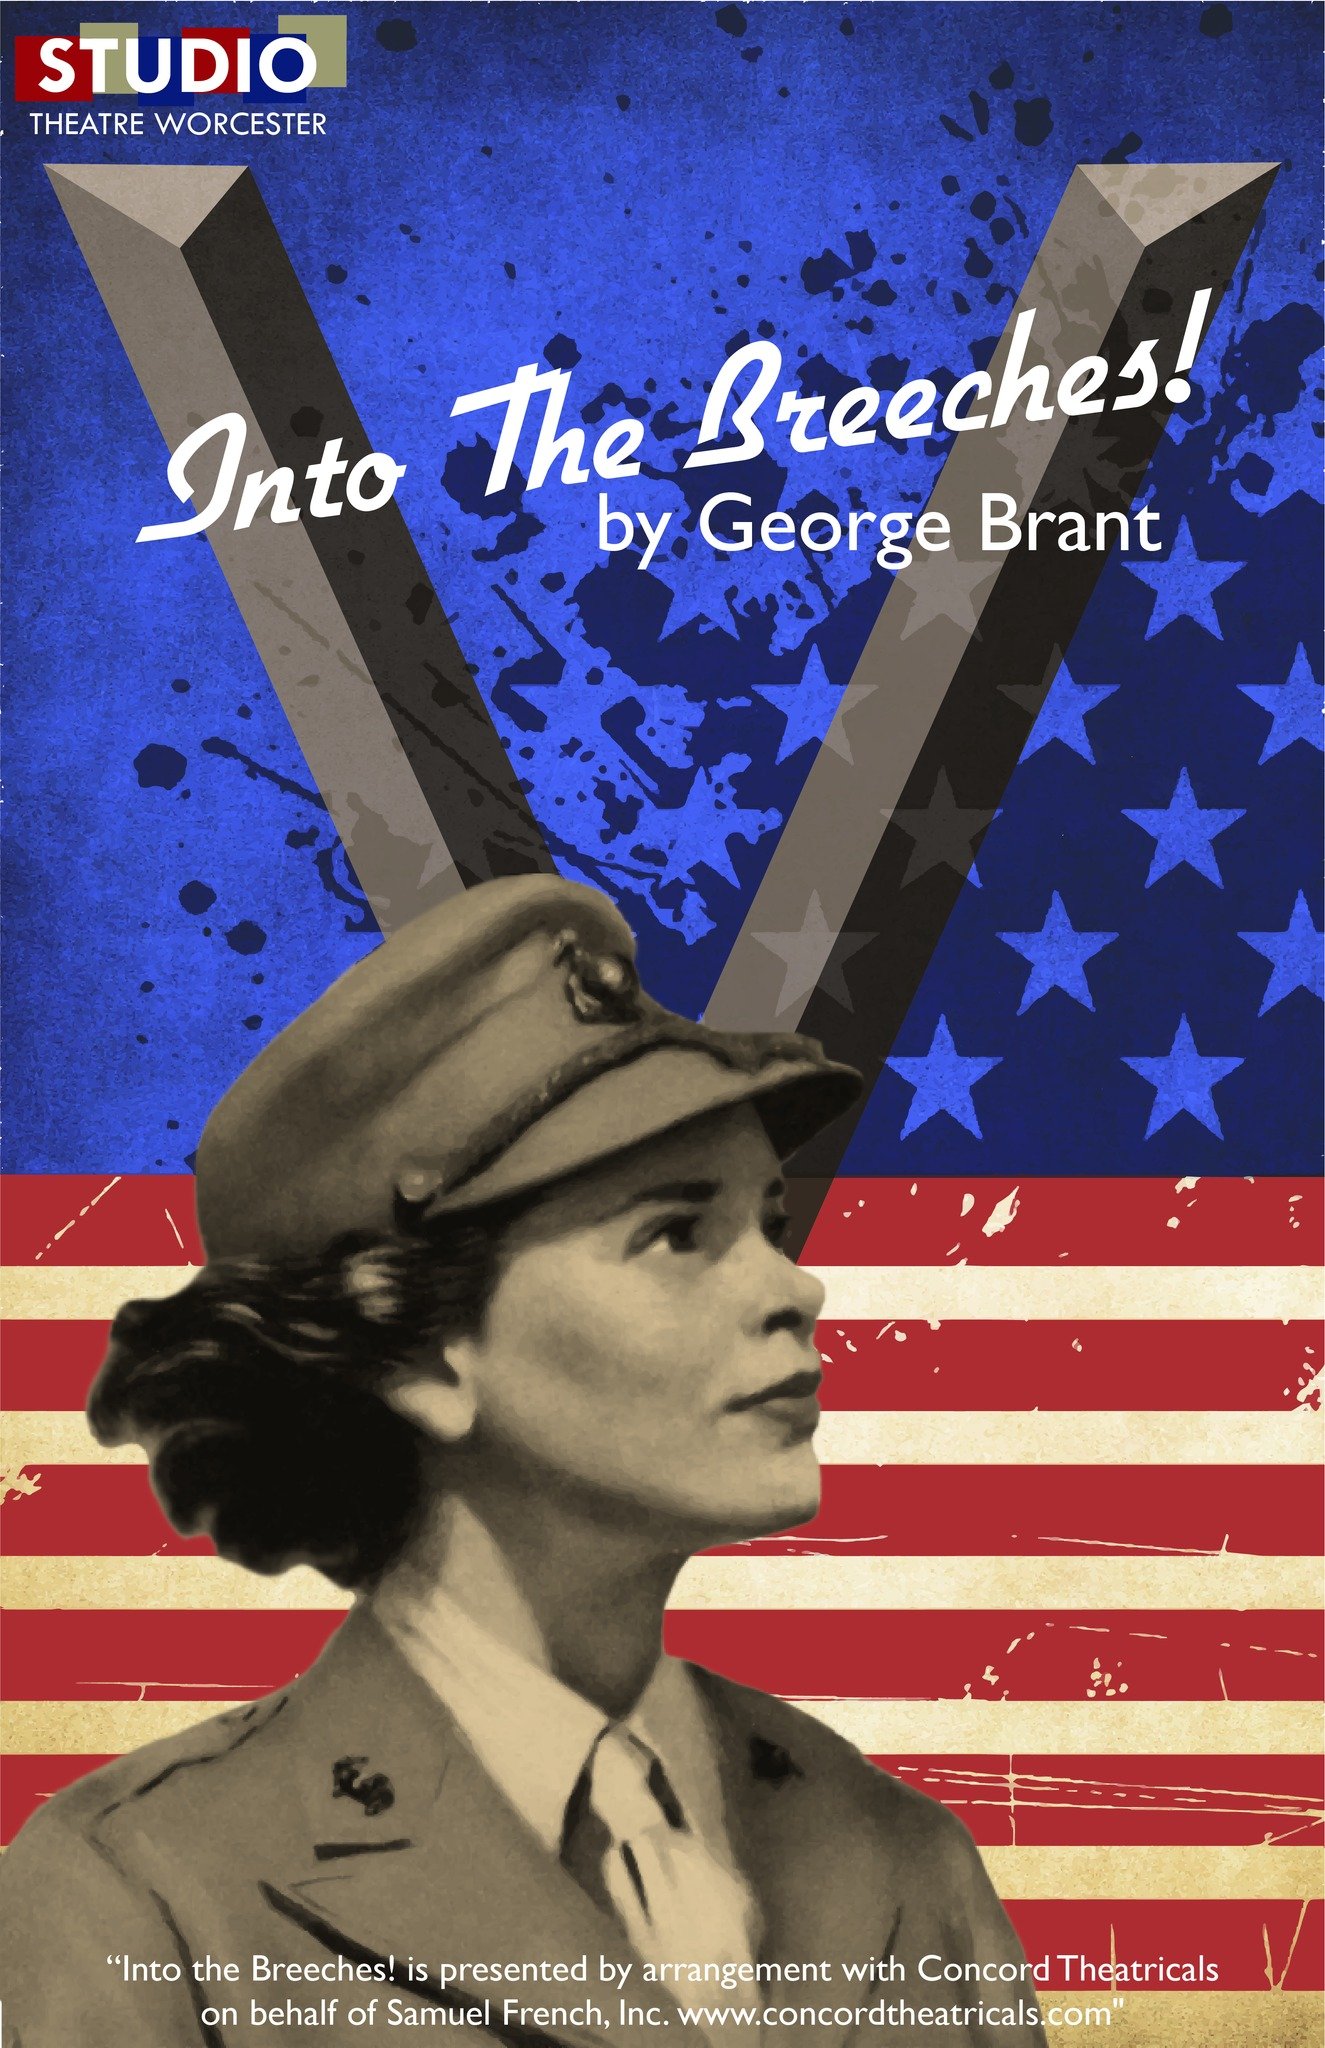 "Into the Breeches!" - By George Brant - Studio Theatre Worcester (Worcester, MA.)